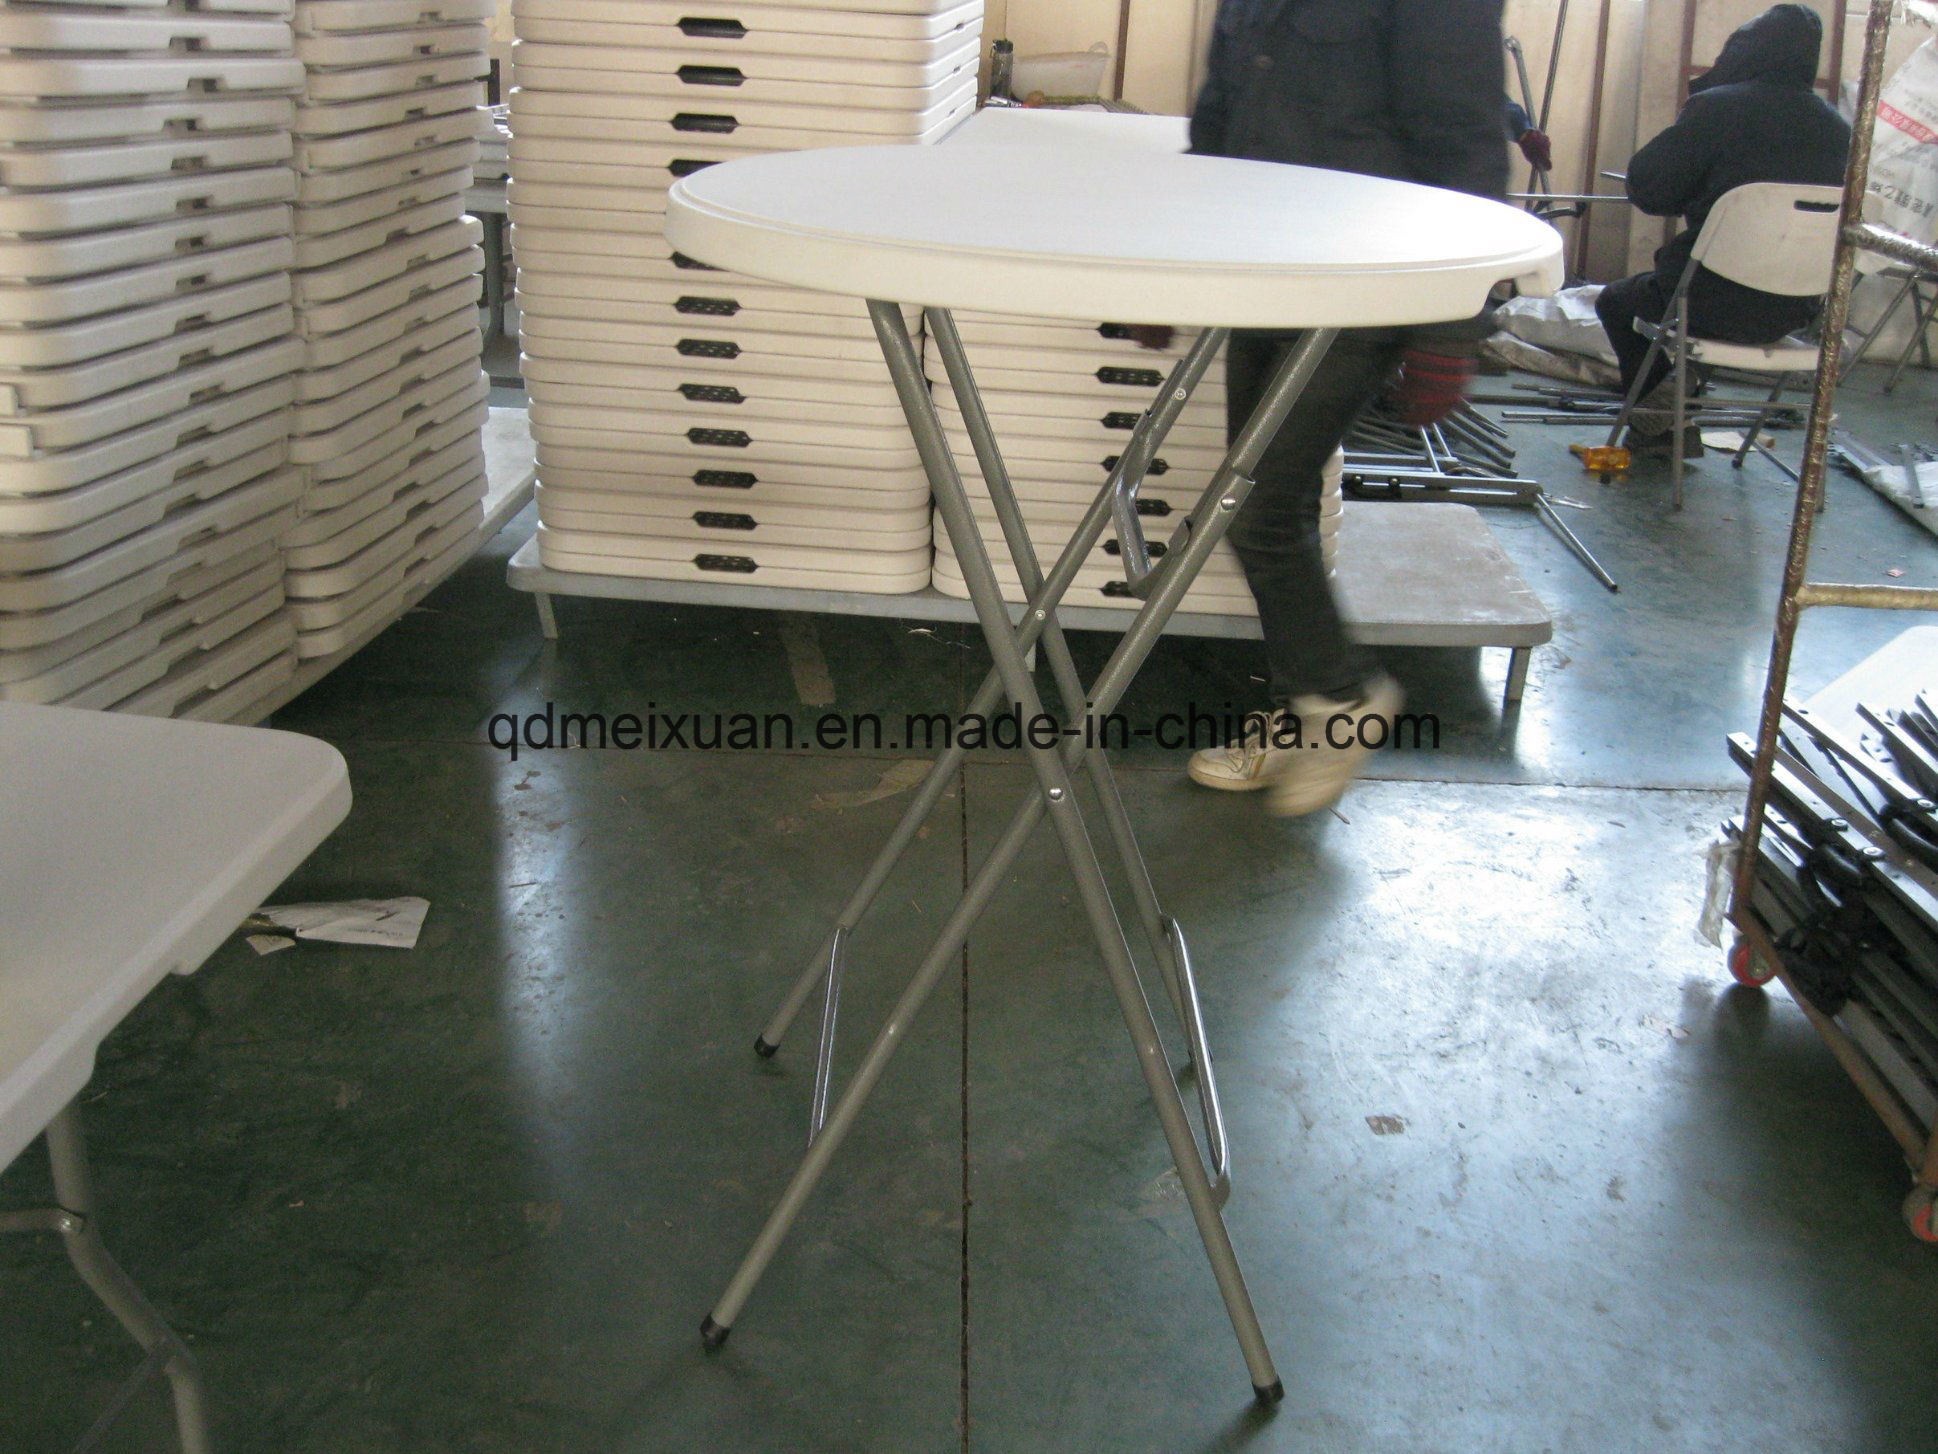 Plastic Folding Table Hotel Banquet Wedding Special Cocktail Table Round Table (M-X3554)